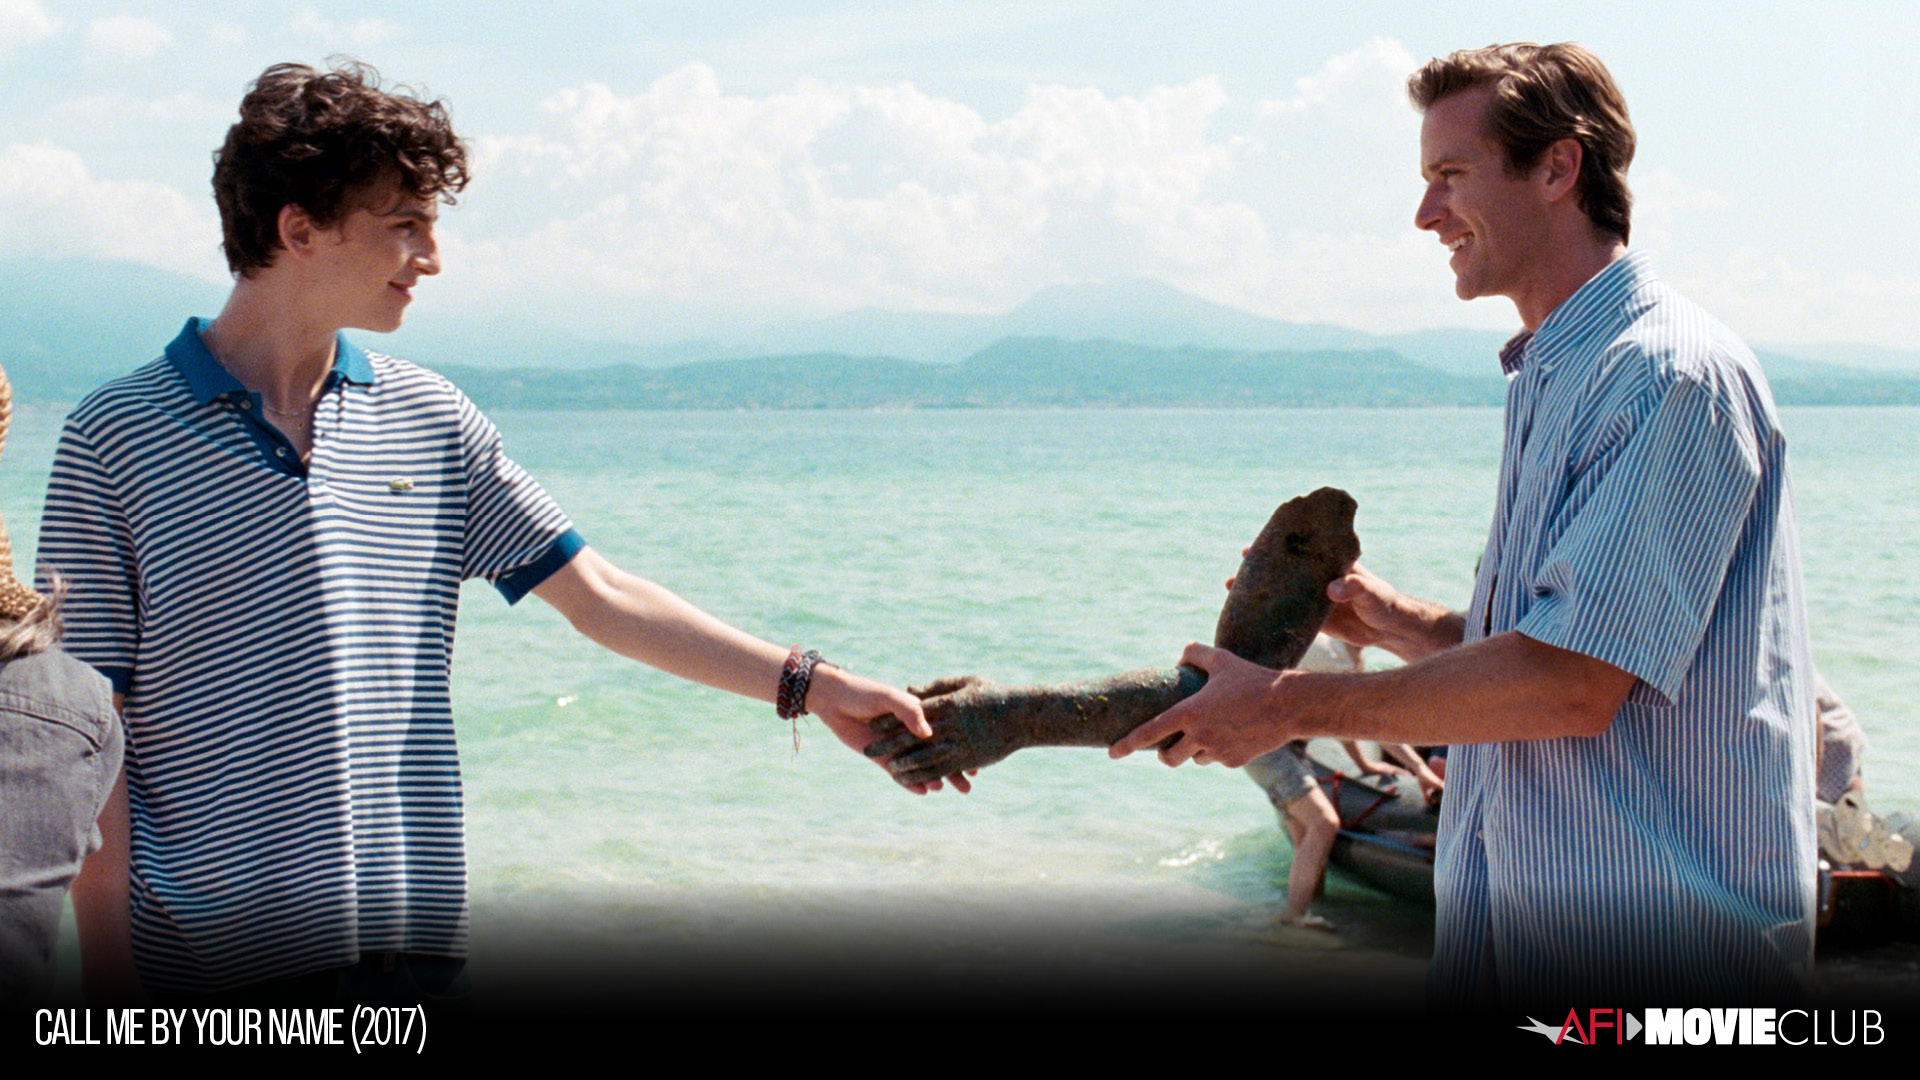 Call Me By Your Name Film Still - Armie Hammer and Timothée Chalamet